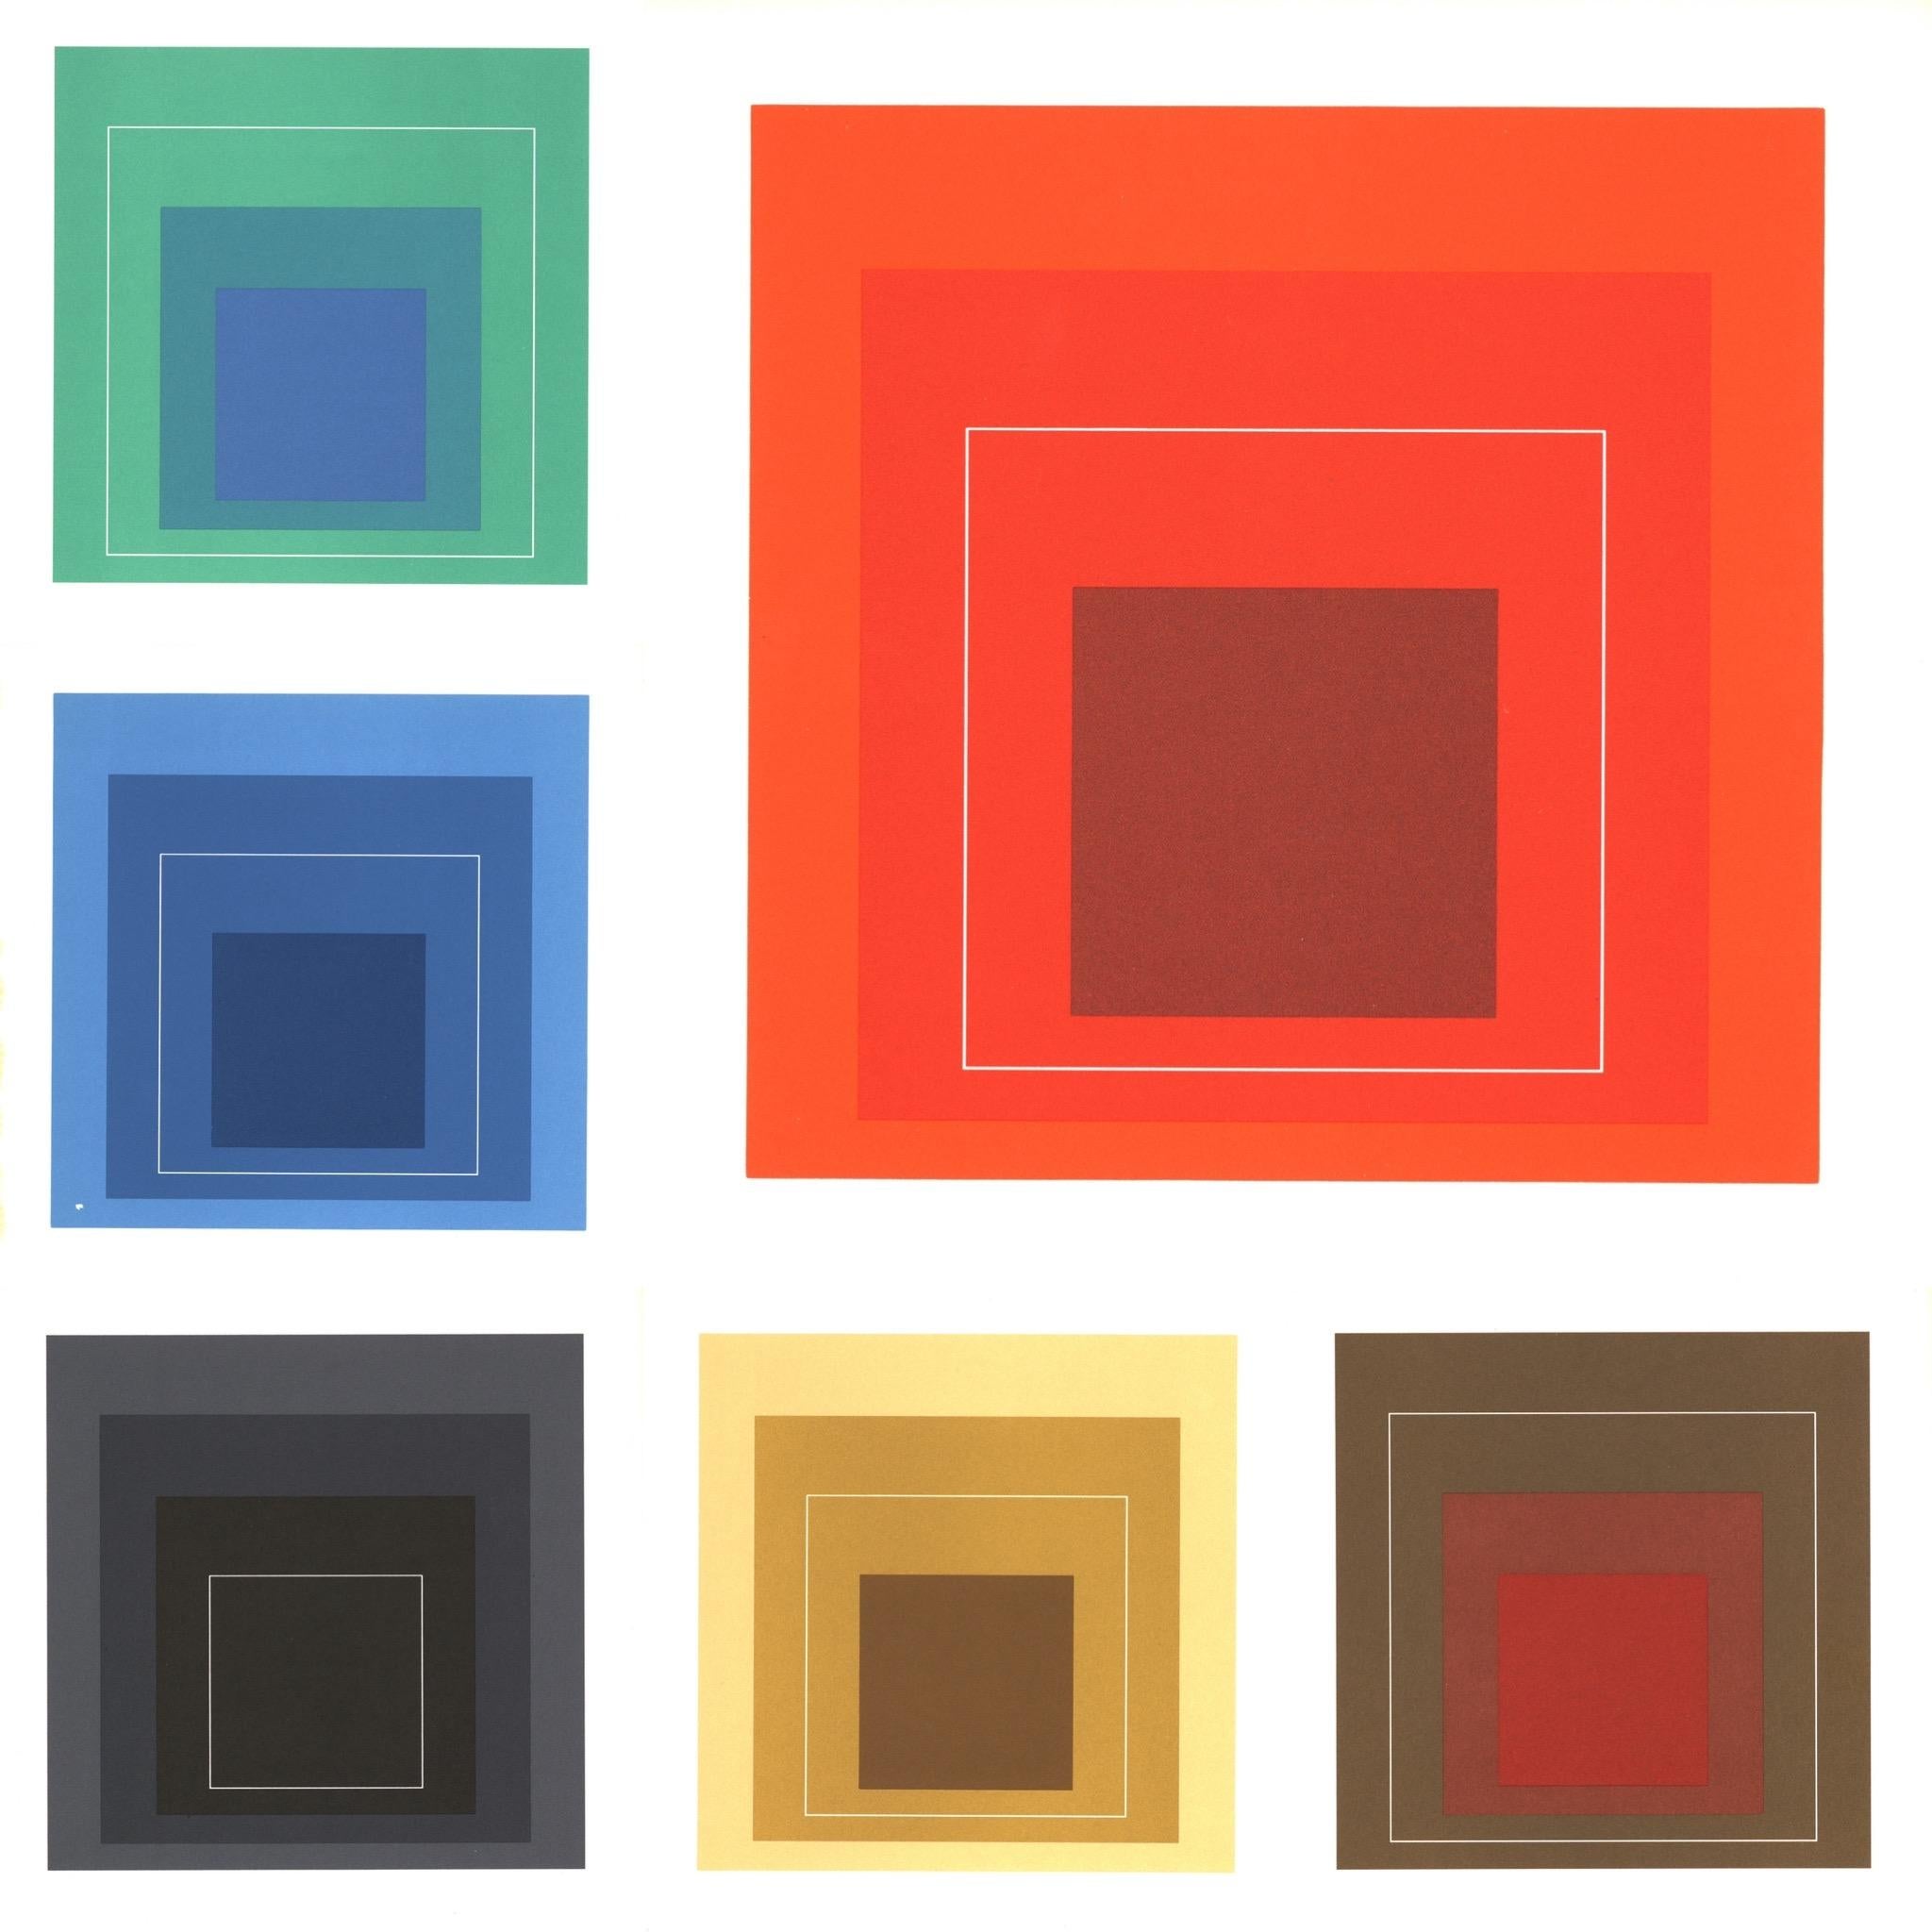 Josef Albers White Line Squares (set of 6) - Print by (after) Josef Albers